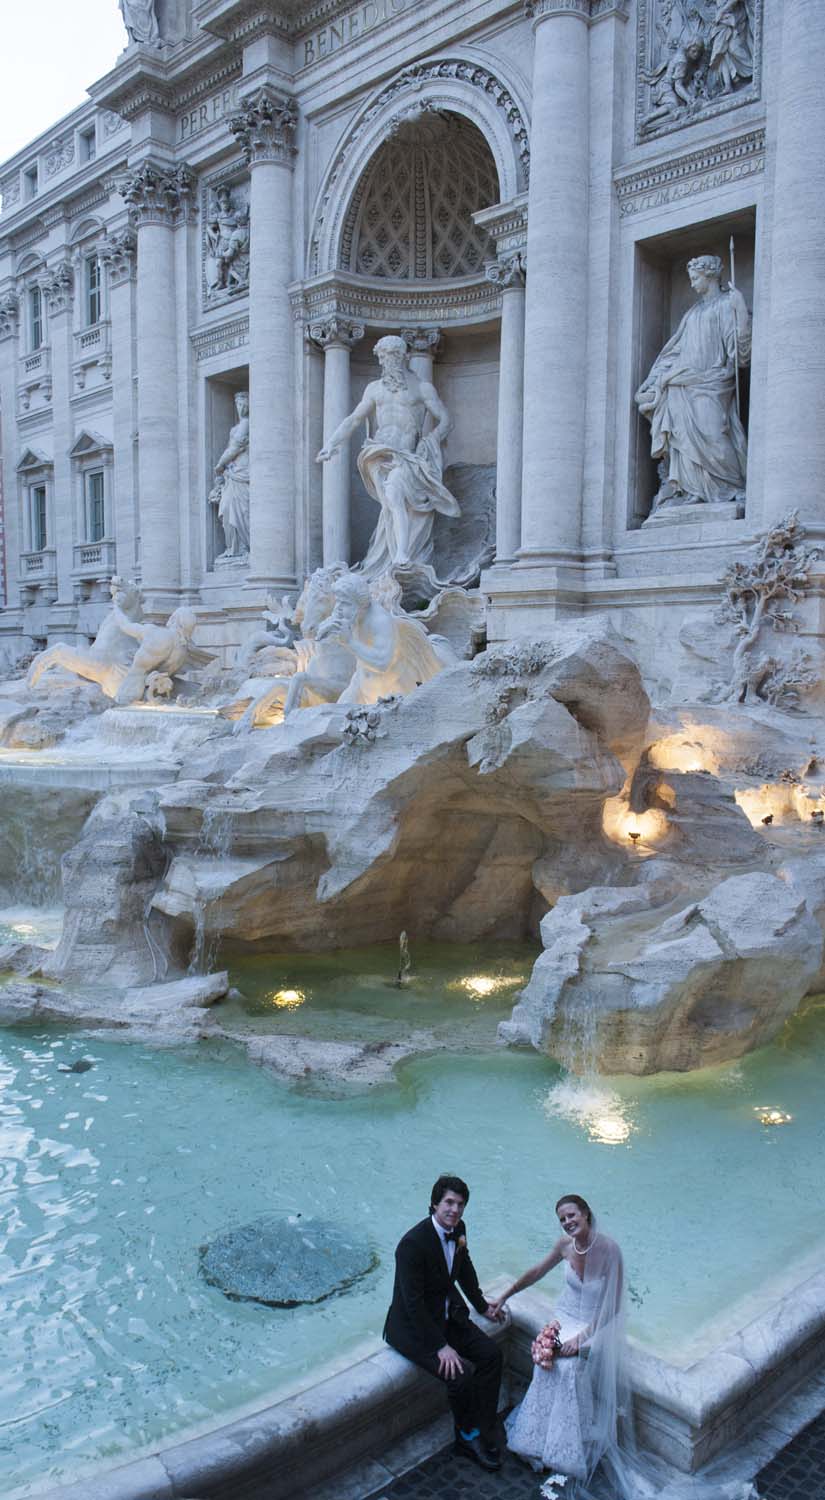 A romantic wedding shooting at the iconic trevi fountain in Rome